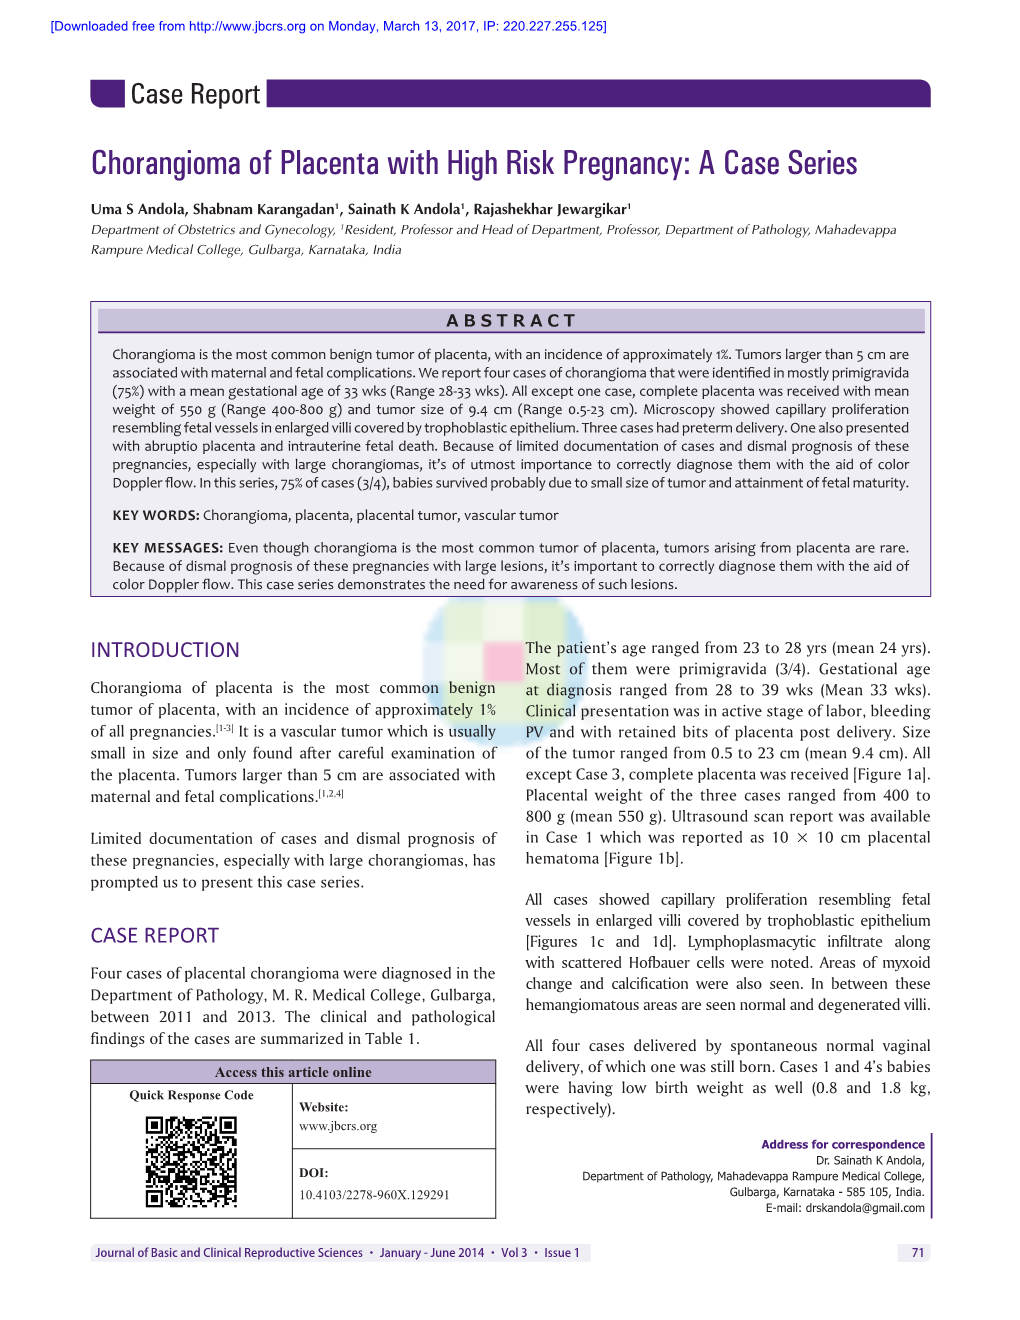 Chorangioma of Placenta with High Risk Pregnancy: a Case Series